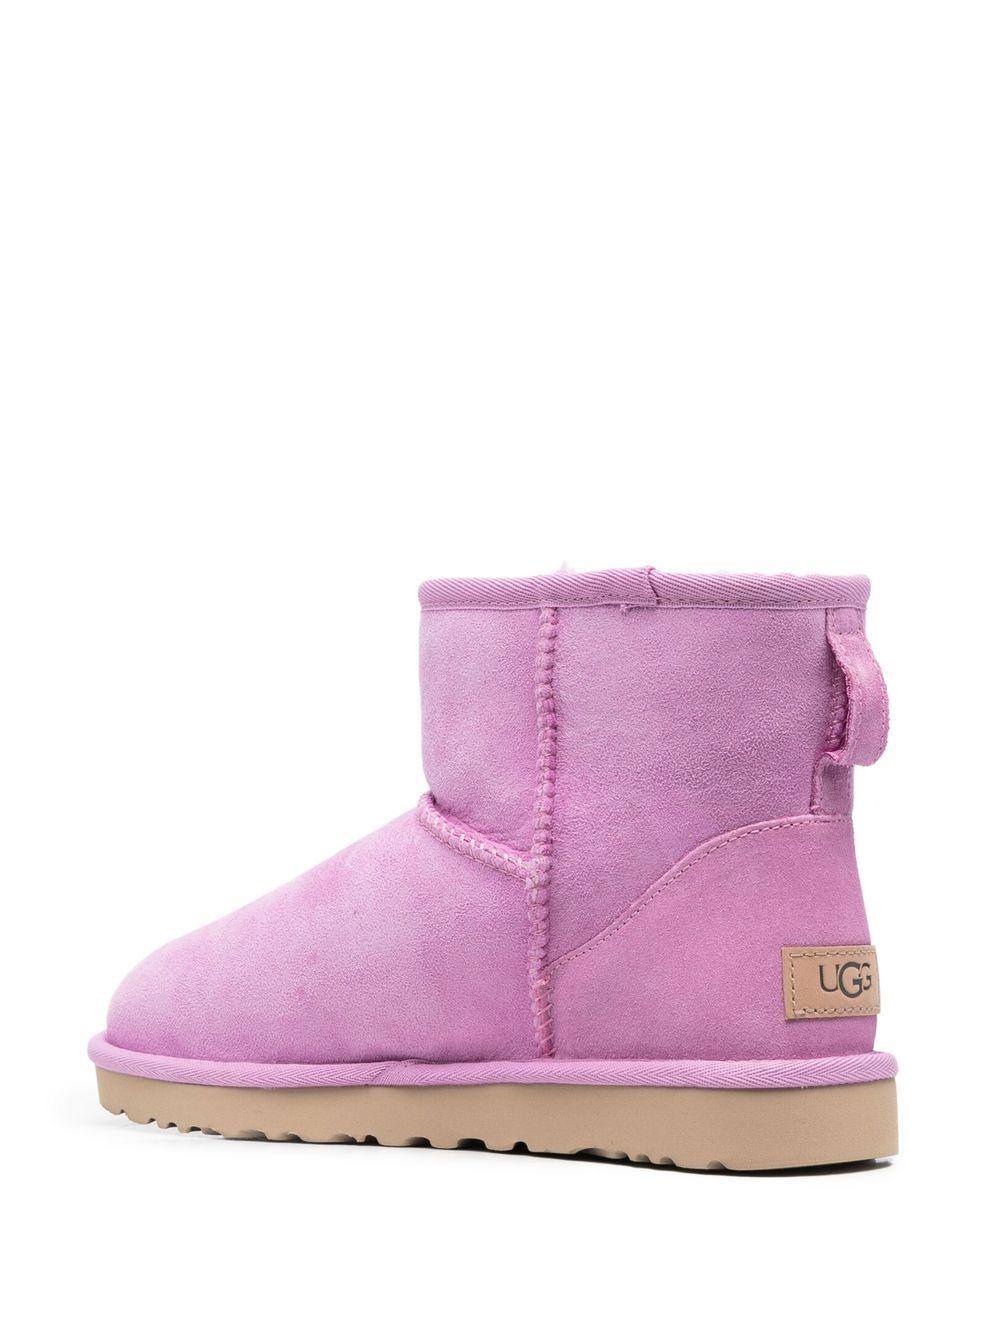 UGG Suede Classic Mini Ii Boots in Pink - Save 4% | Lyst